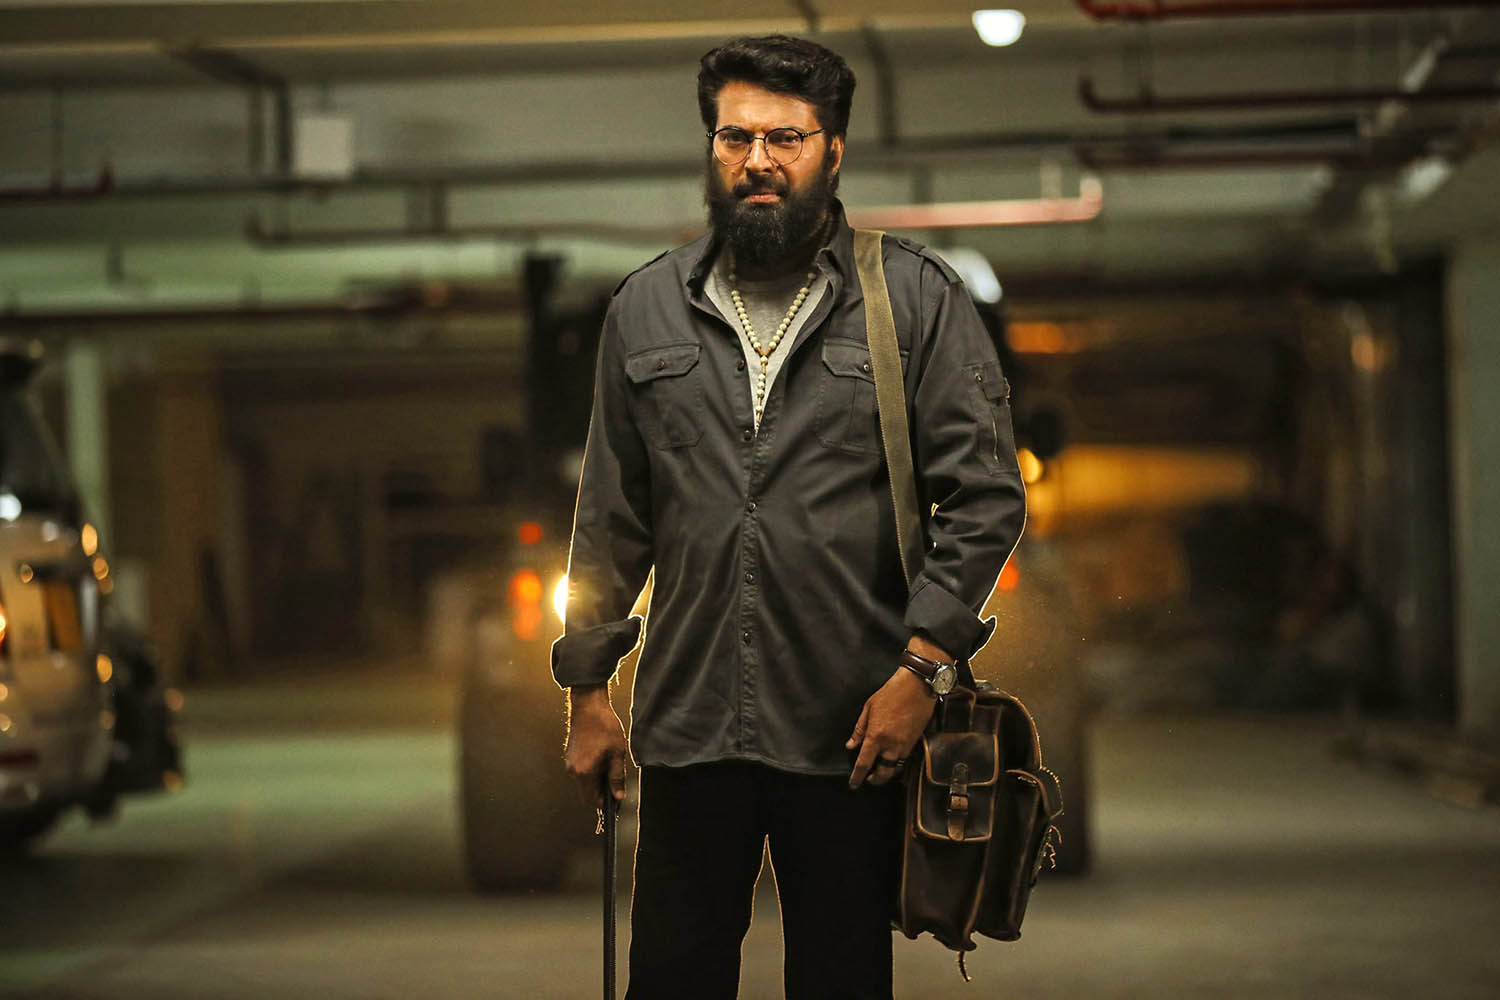 the priest review,the priest ratings,the priest hit or flop,mammootty,mammootty new movie,mammootty the priest review,manju warrier,manju warrier new film,latest malayalam cinema,manju warrier mammootty the priest latest reports,the priest malayalam movie review,the priest kerala box office reports